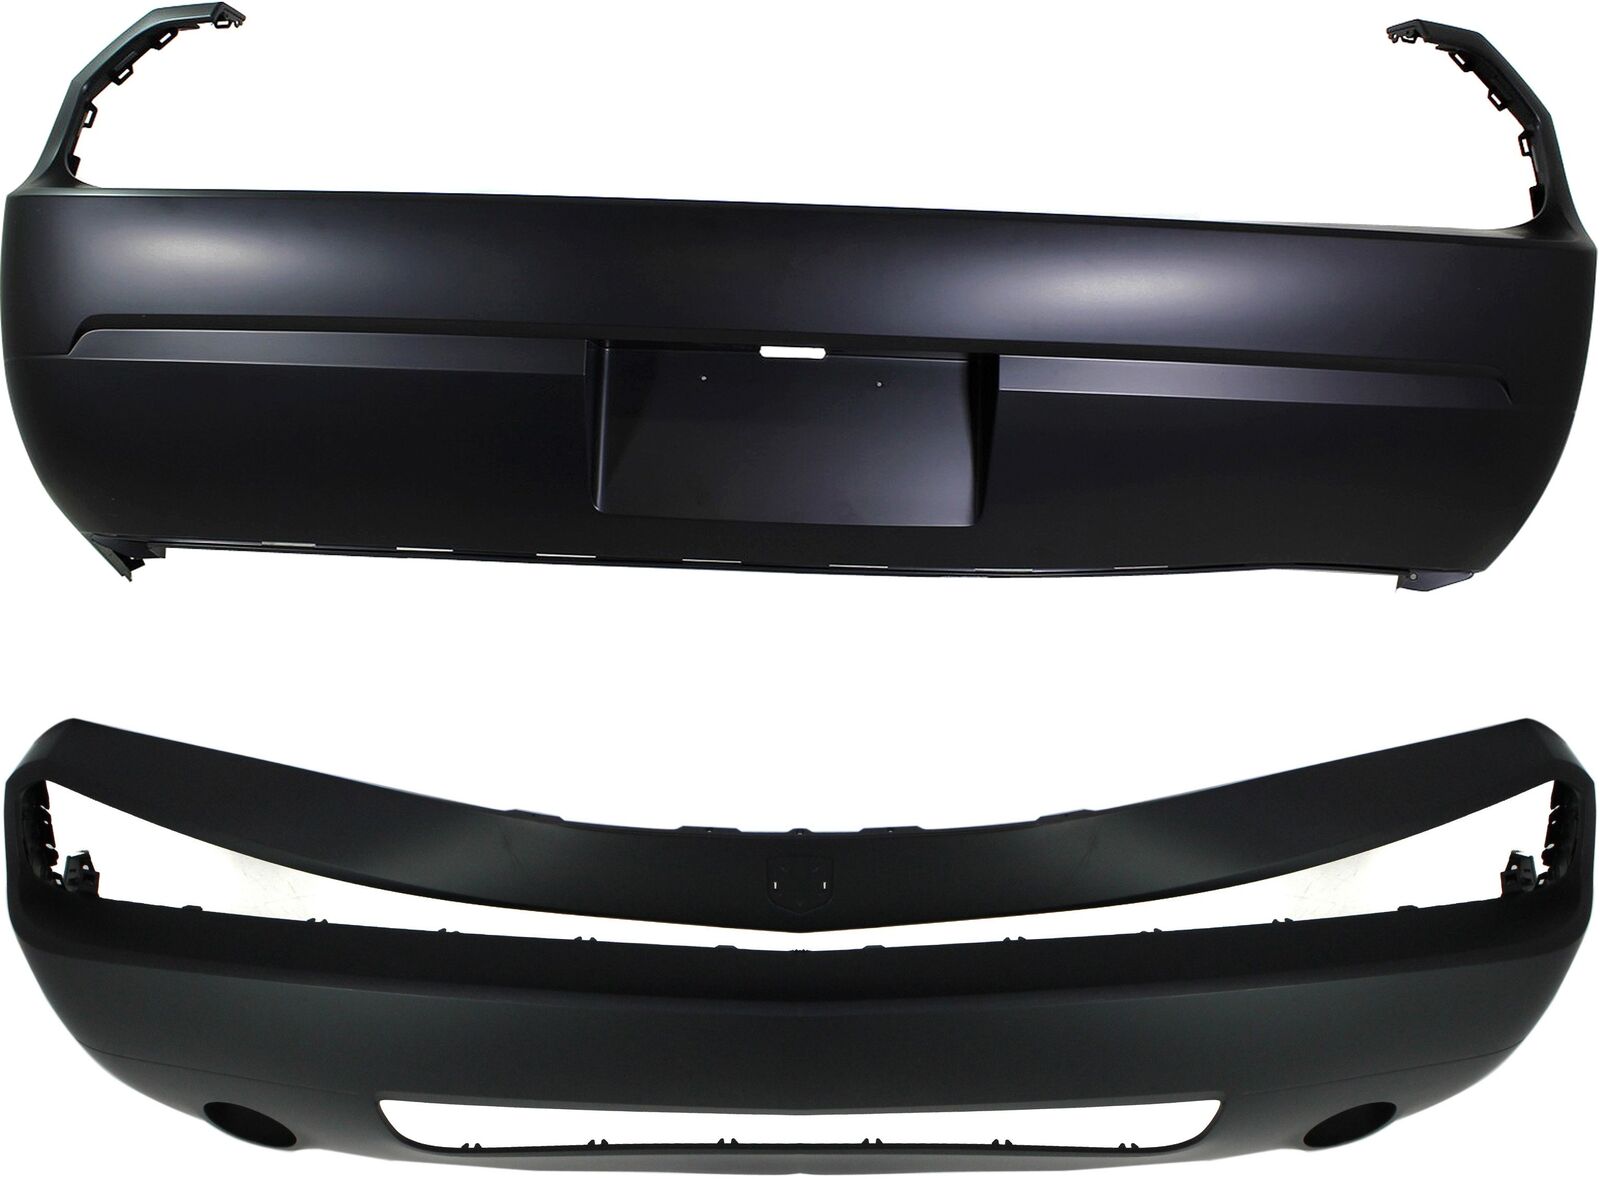 Front and Rear Bumper Cover Set for Dodge Challenger 2008-2010, Primed (Ready to